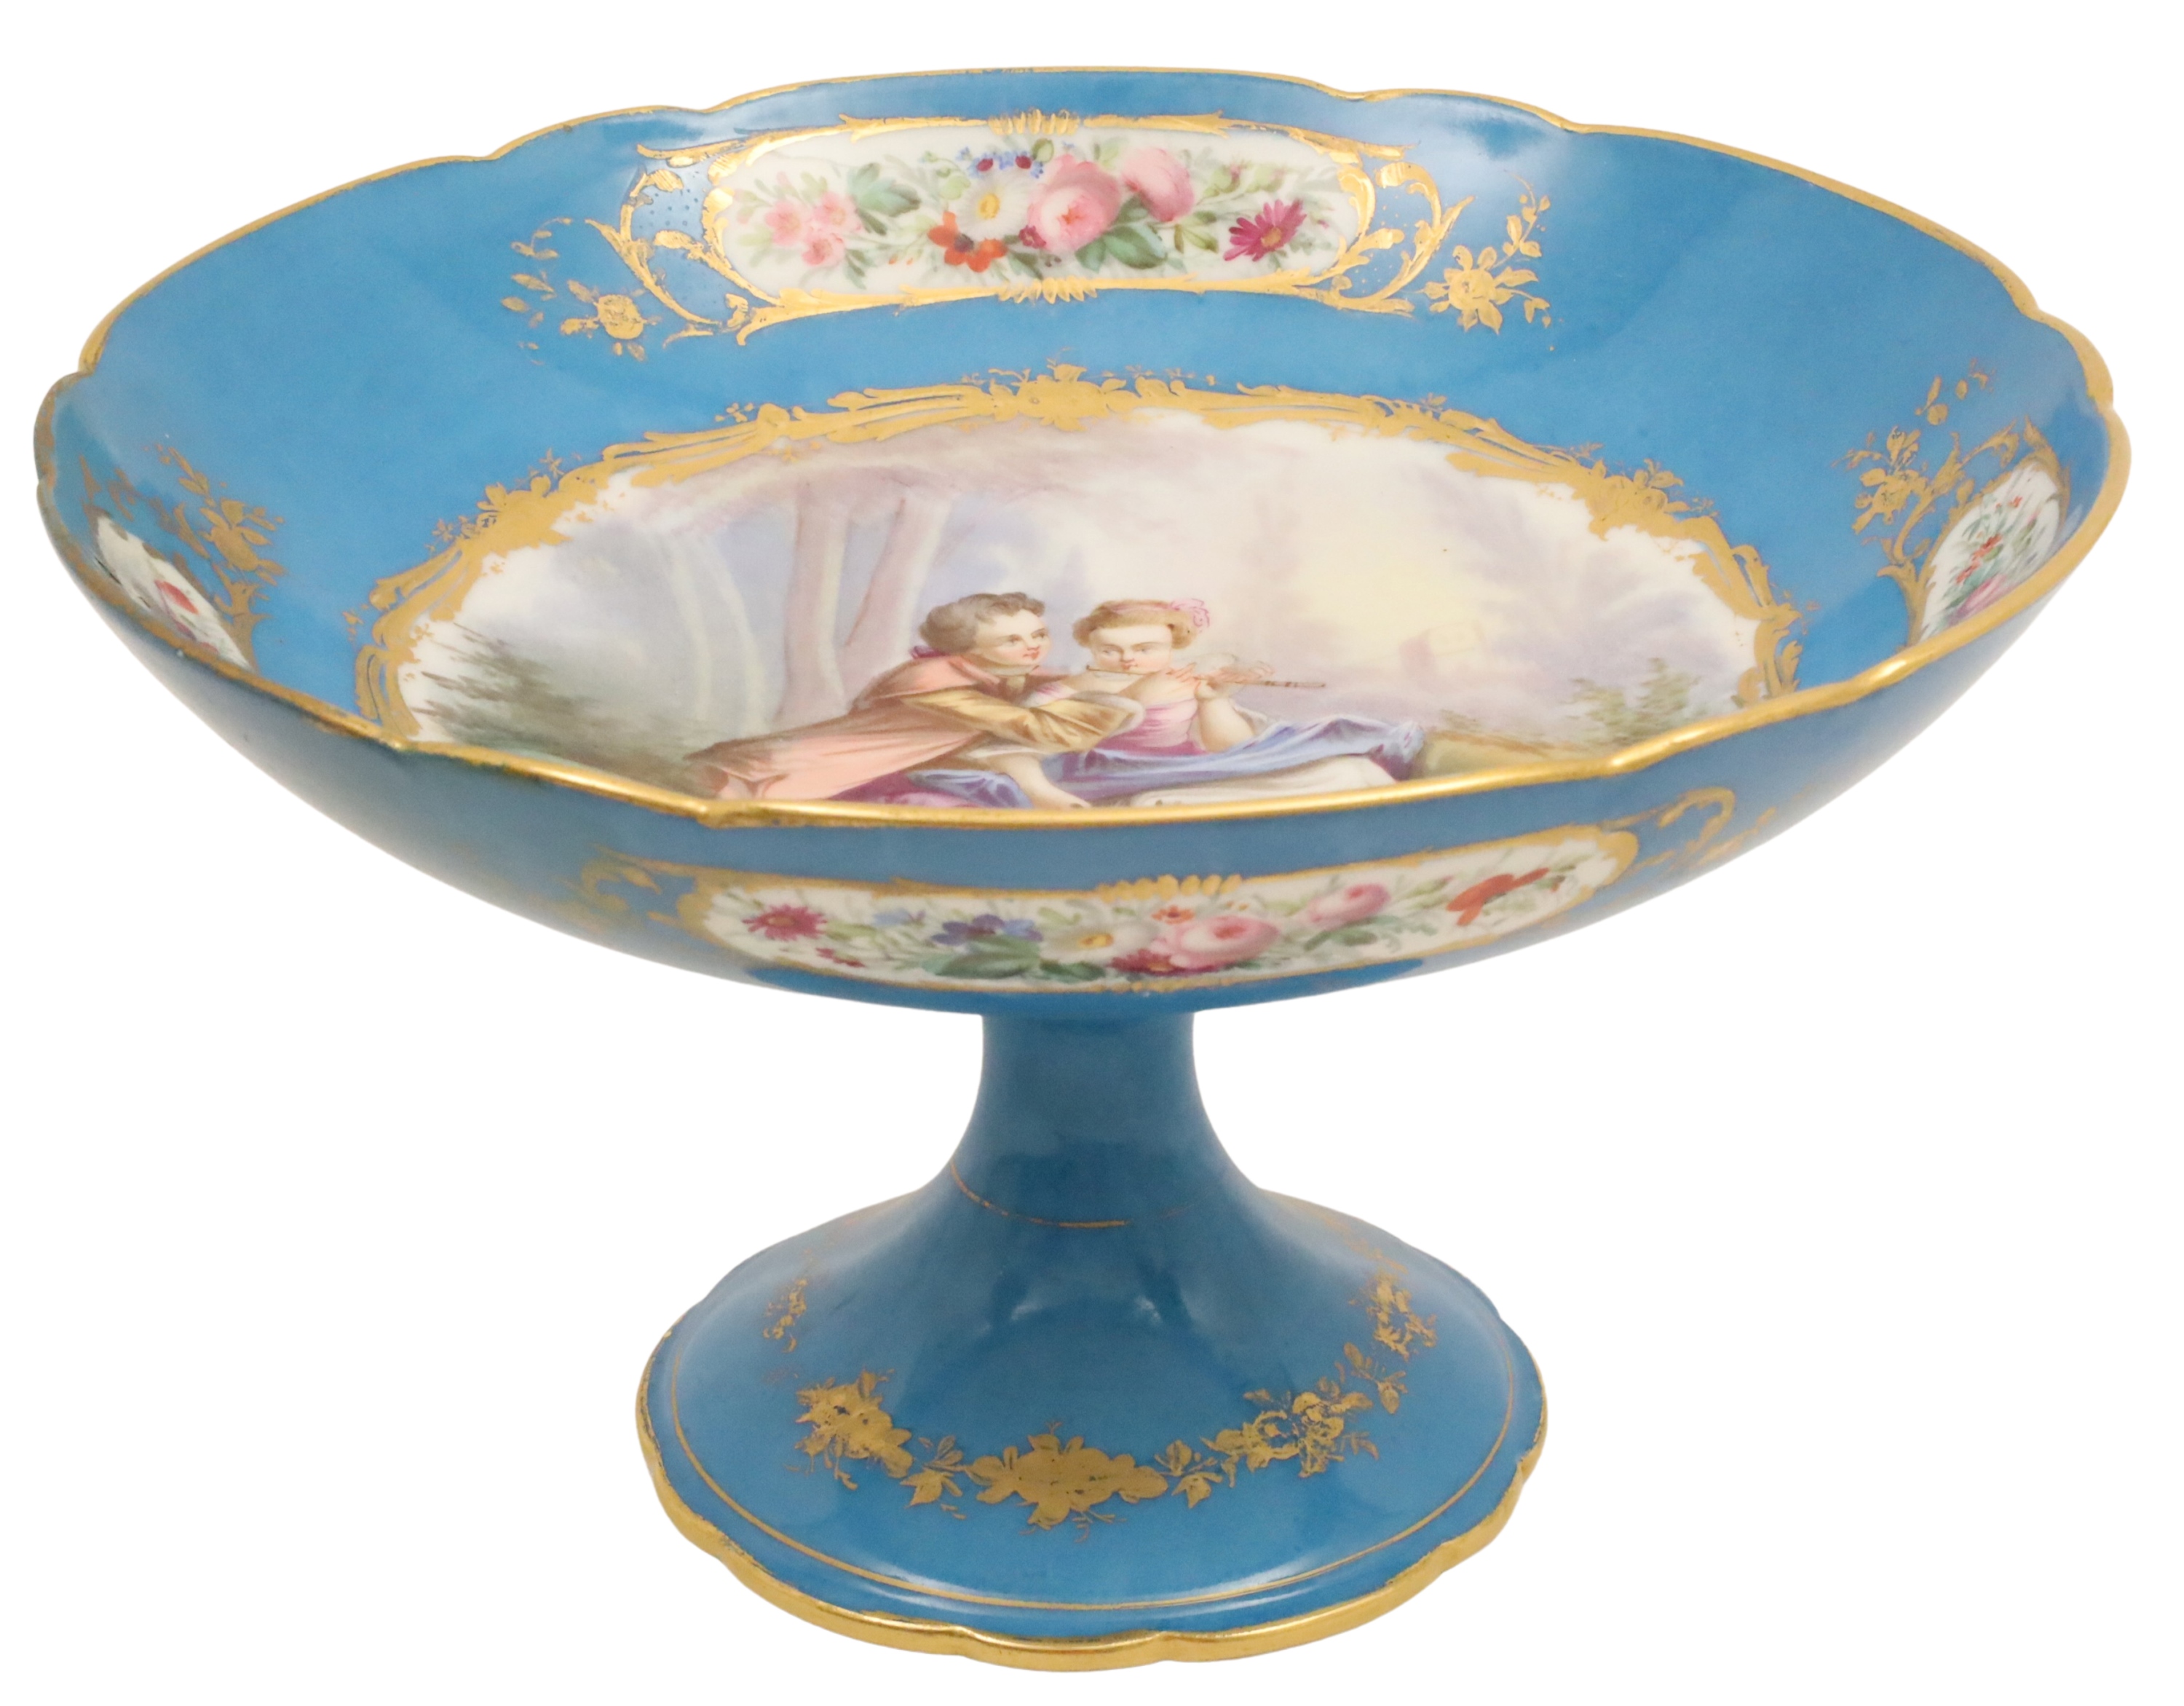 FRENCH SEVRES PORCELAIN COMPOTE 2f8e71